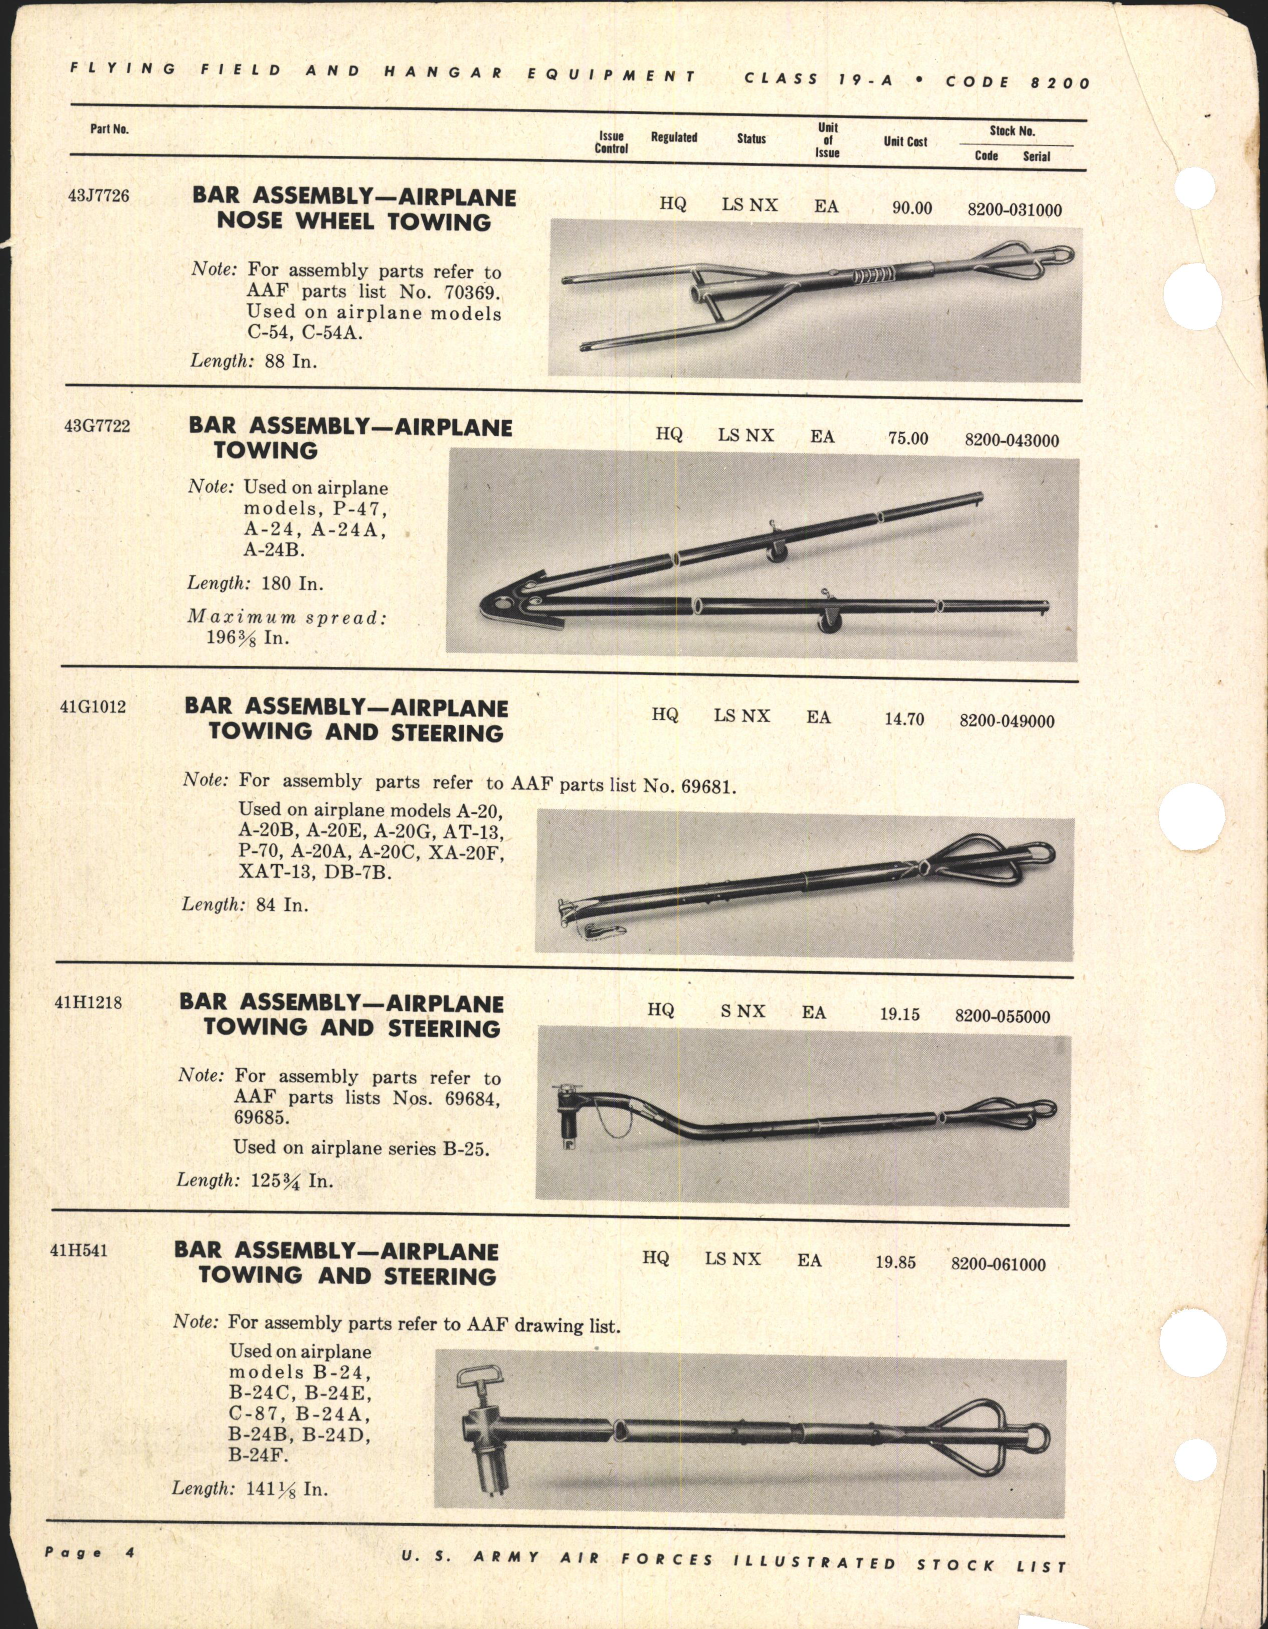 Sample page 4 from AirCorps Library document: Stock List for Flying Field and Hangar Equipment